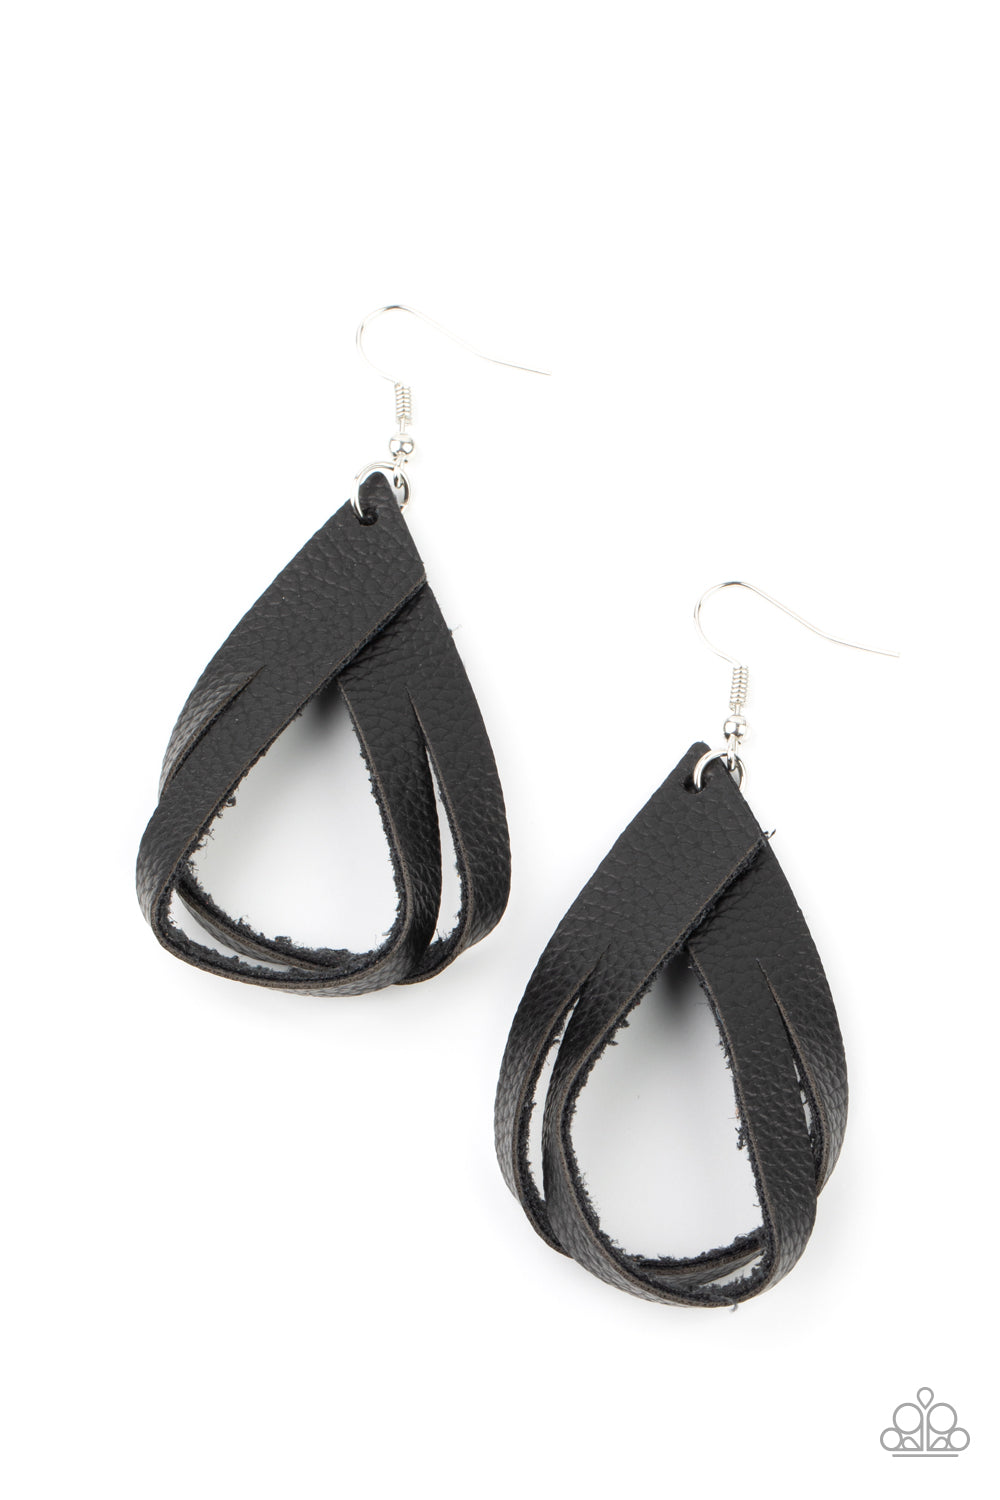 five-dollar-jewelry-thats-a-strap-black-earrings-paparazzi-accessories